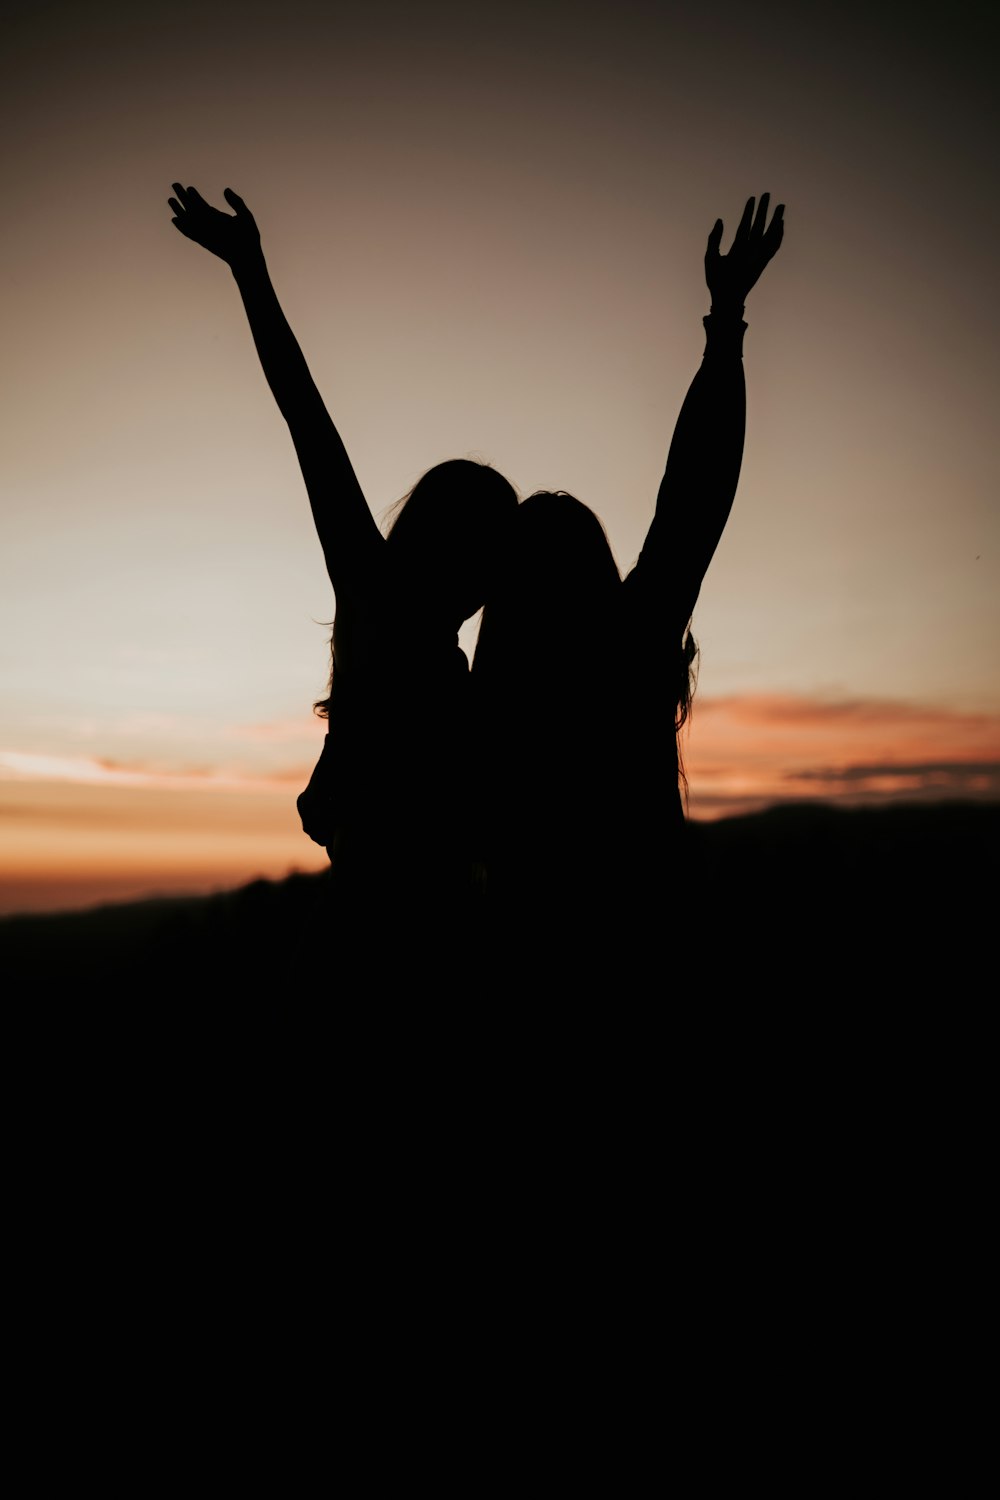 a silhouette of a woman and a man with their hands up